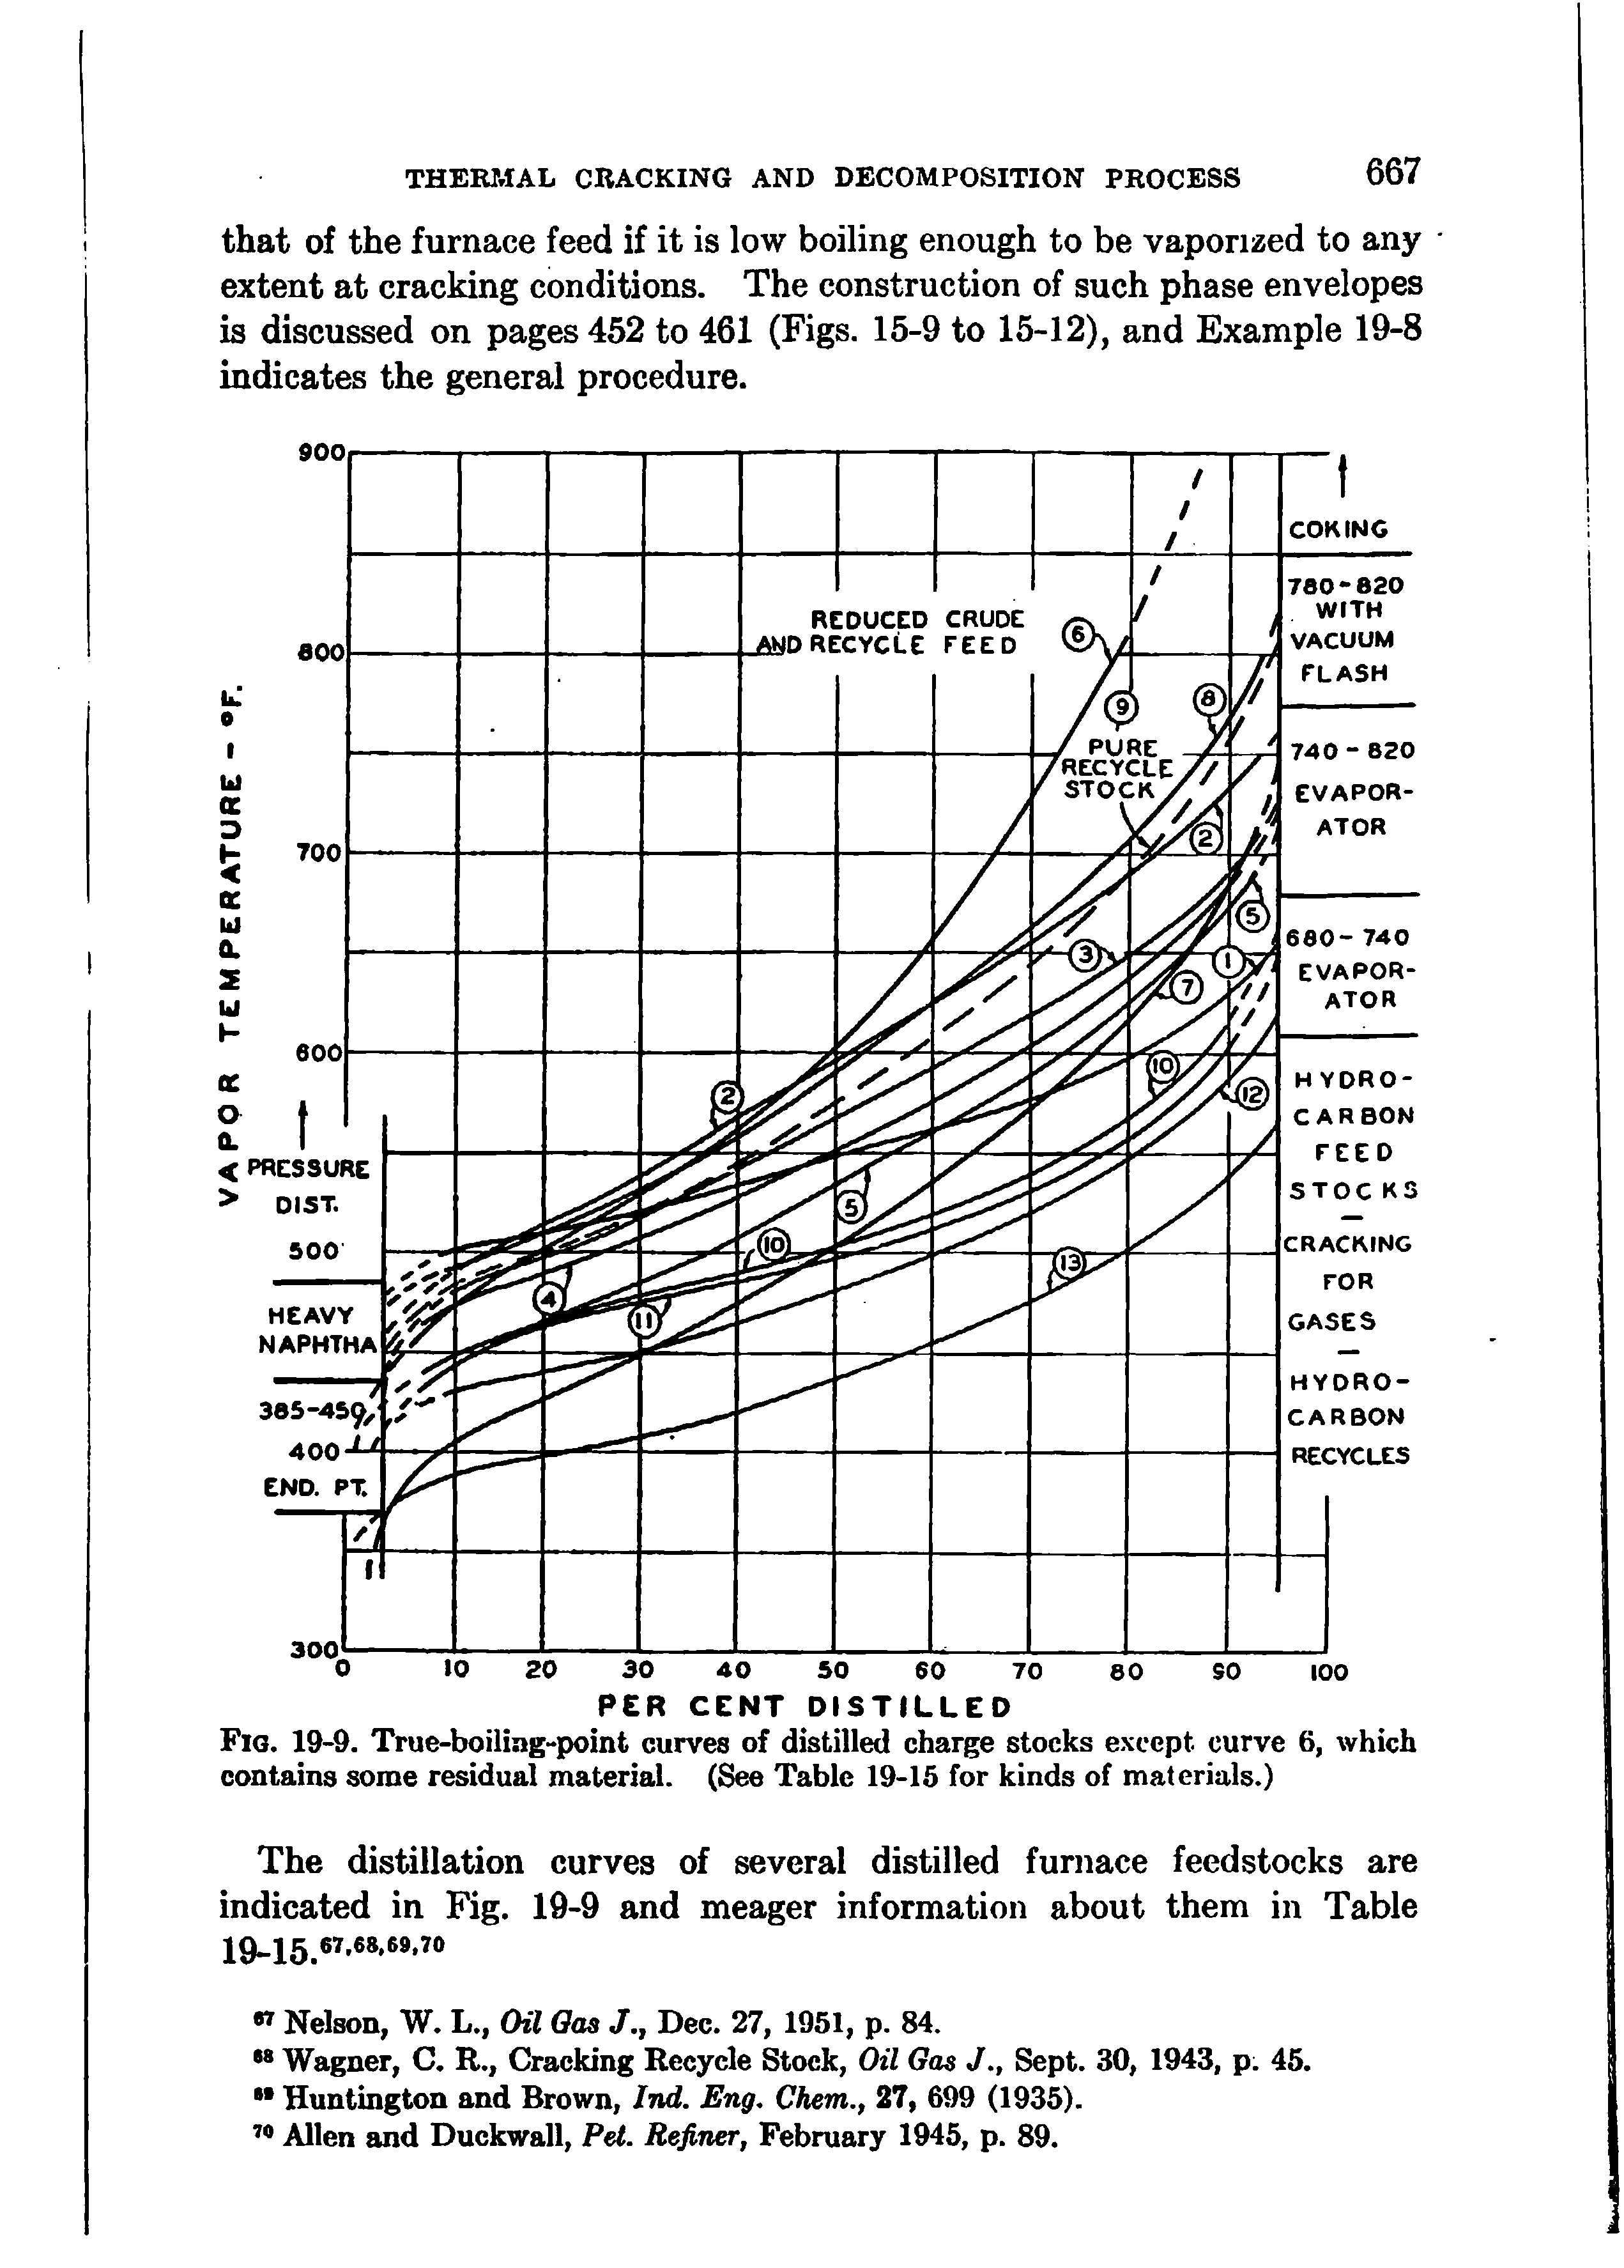 Fig. 19-9. True-boiling-point curves of distilled charge stocks except curve 6, which contains some residual material. (See Table 19-15 for kinds of materials.)...